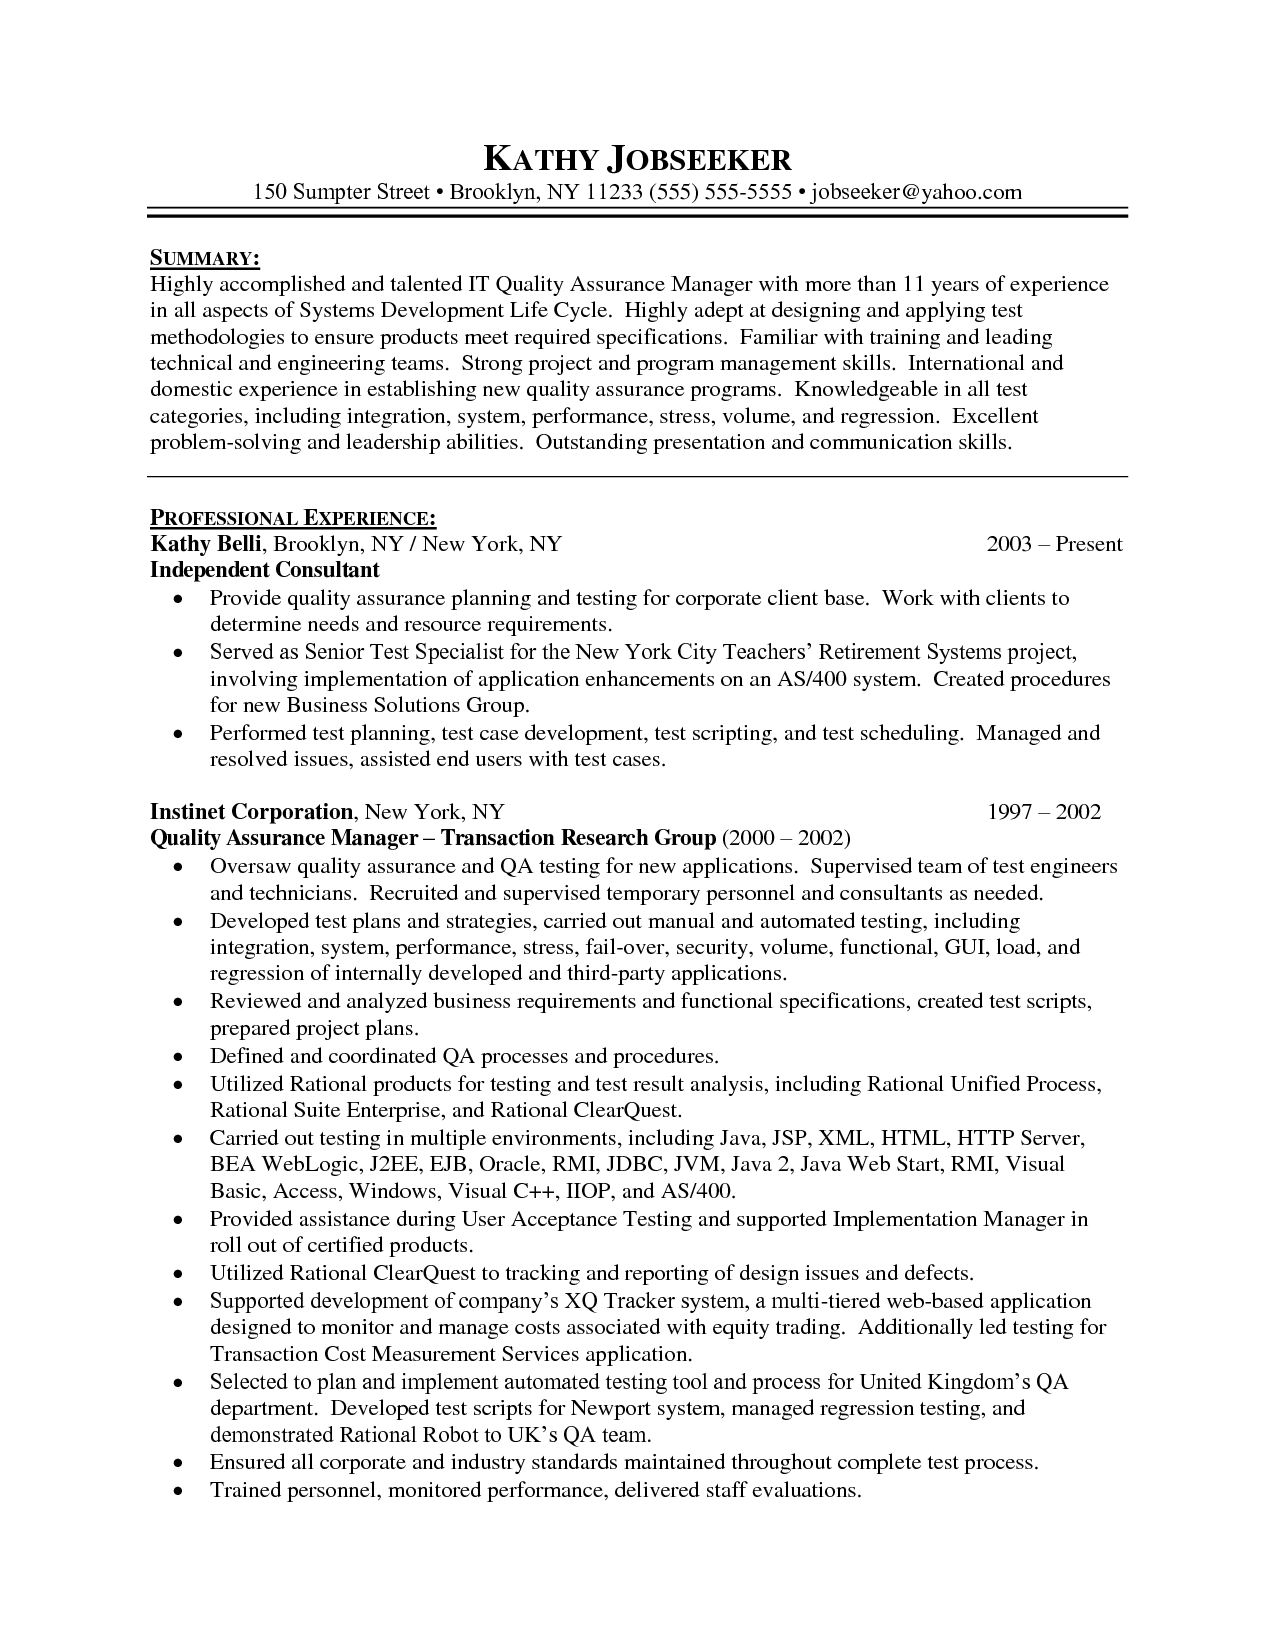 Resume Templates Quality Assurance Manager  